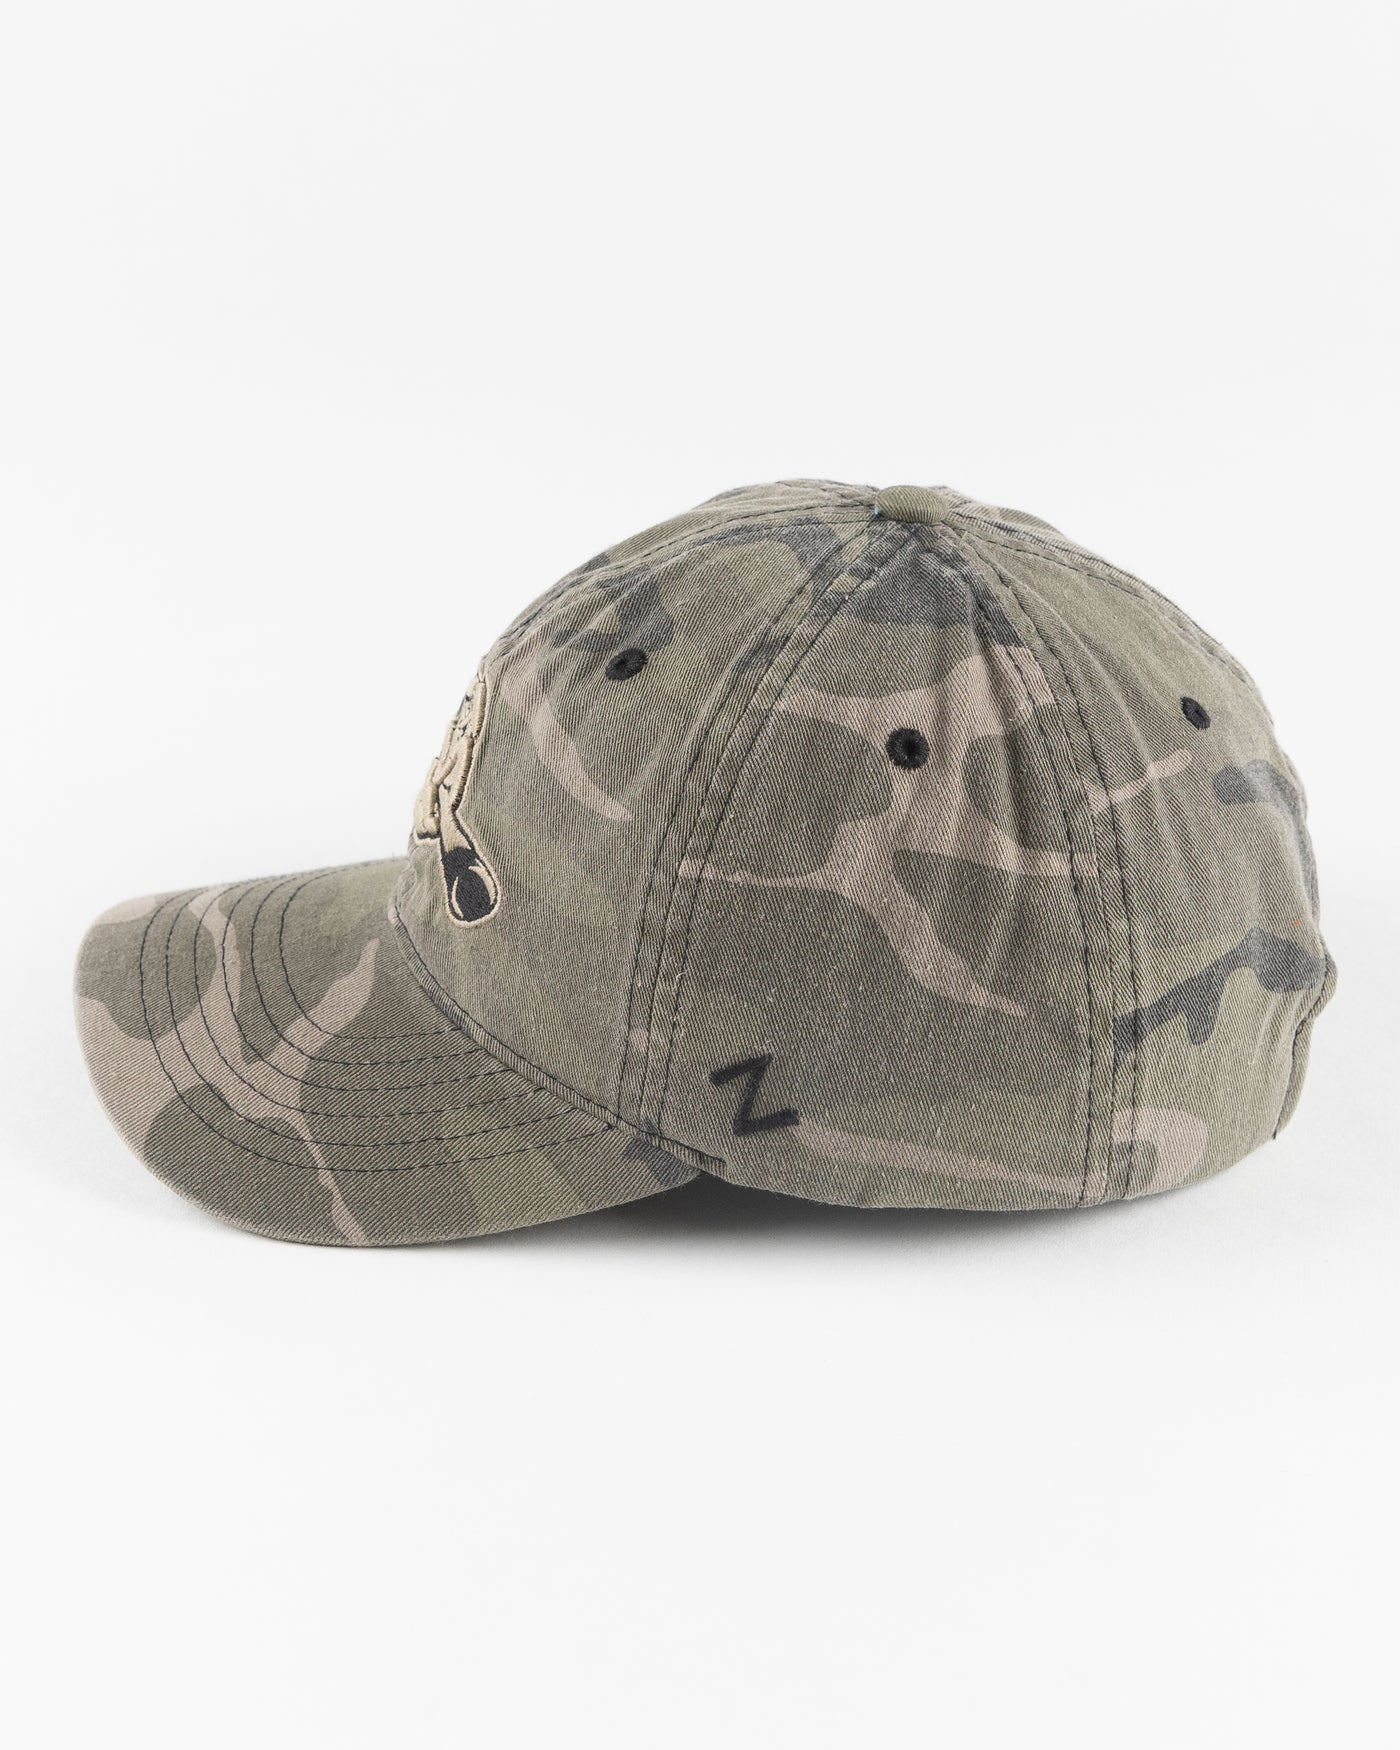 camo Zephyr adjustable cap with Hammy embroidered on front - left side lay flat